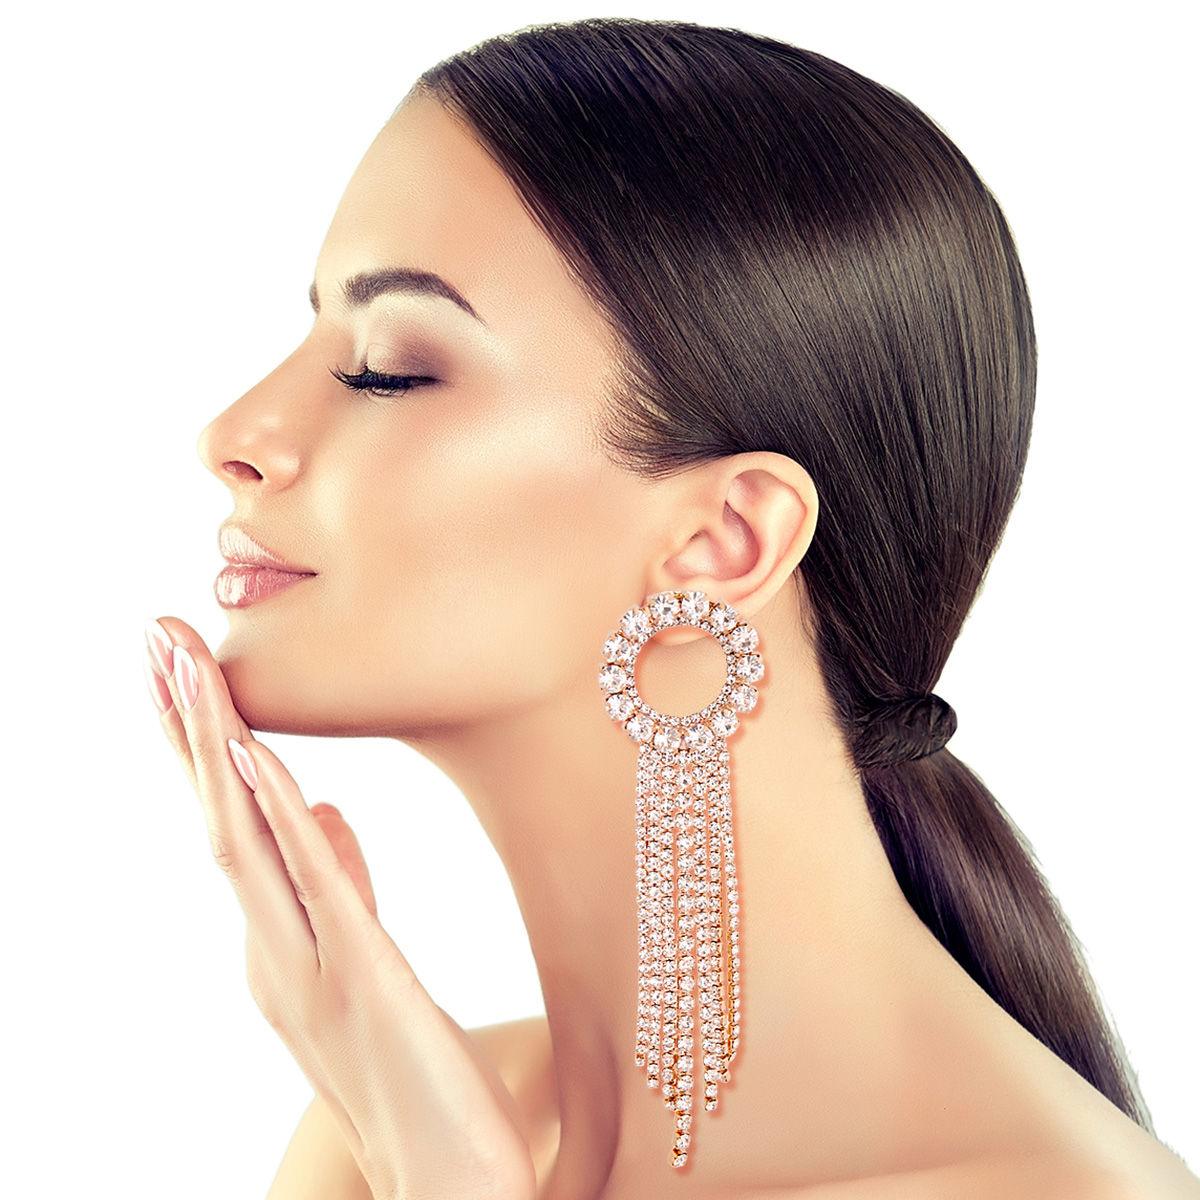 Rhinestone Statement Fashion Earrings: Add Extra Flair to your Look